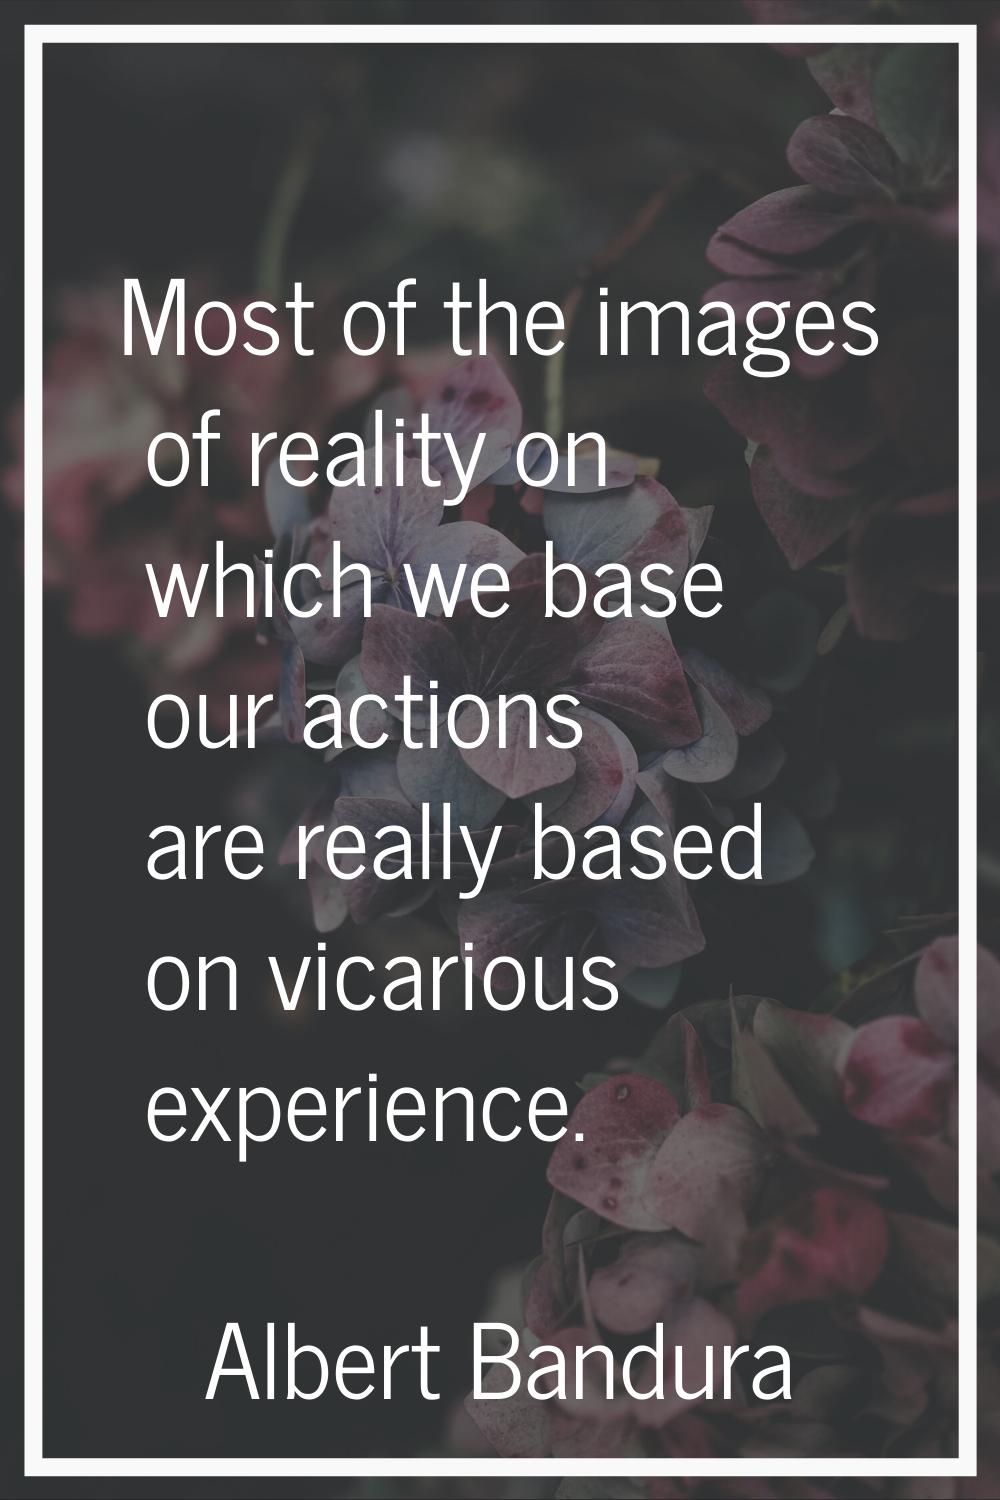 Most of the images of reality on which we base our actions are really based on vicarious experience